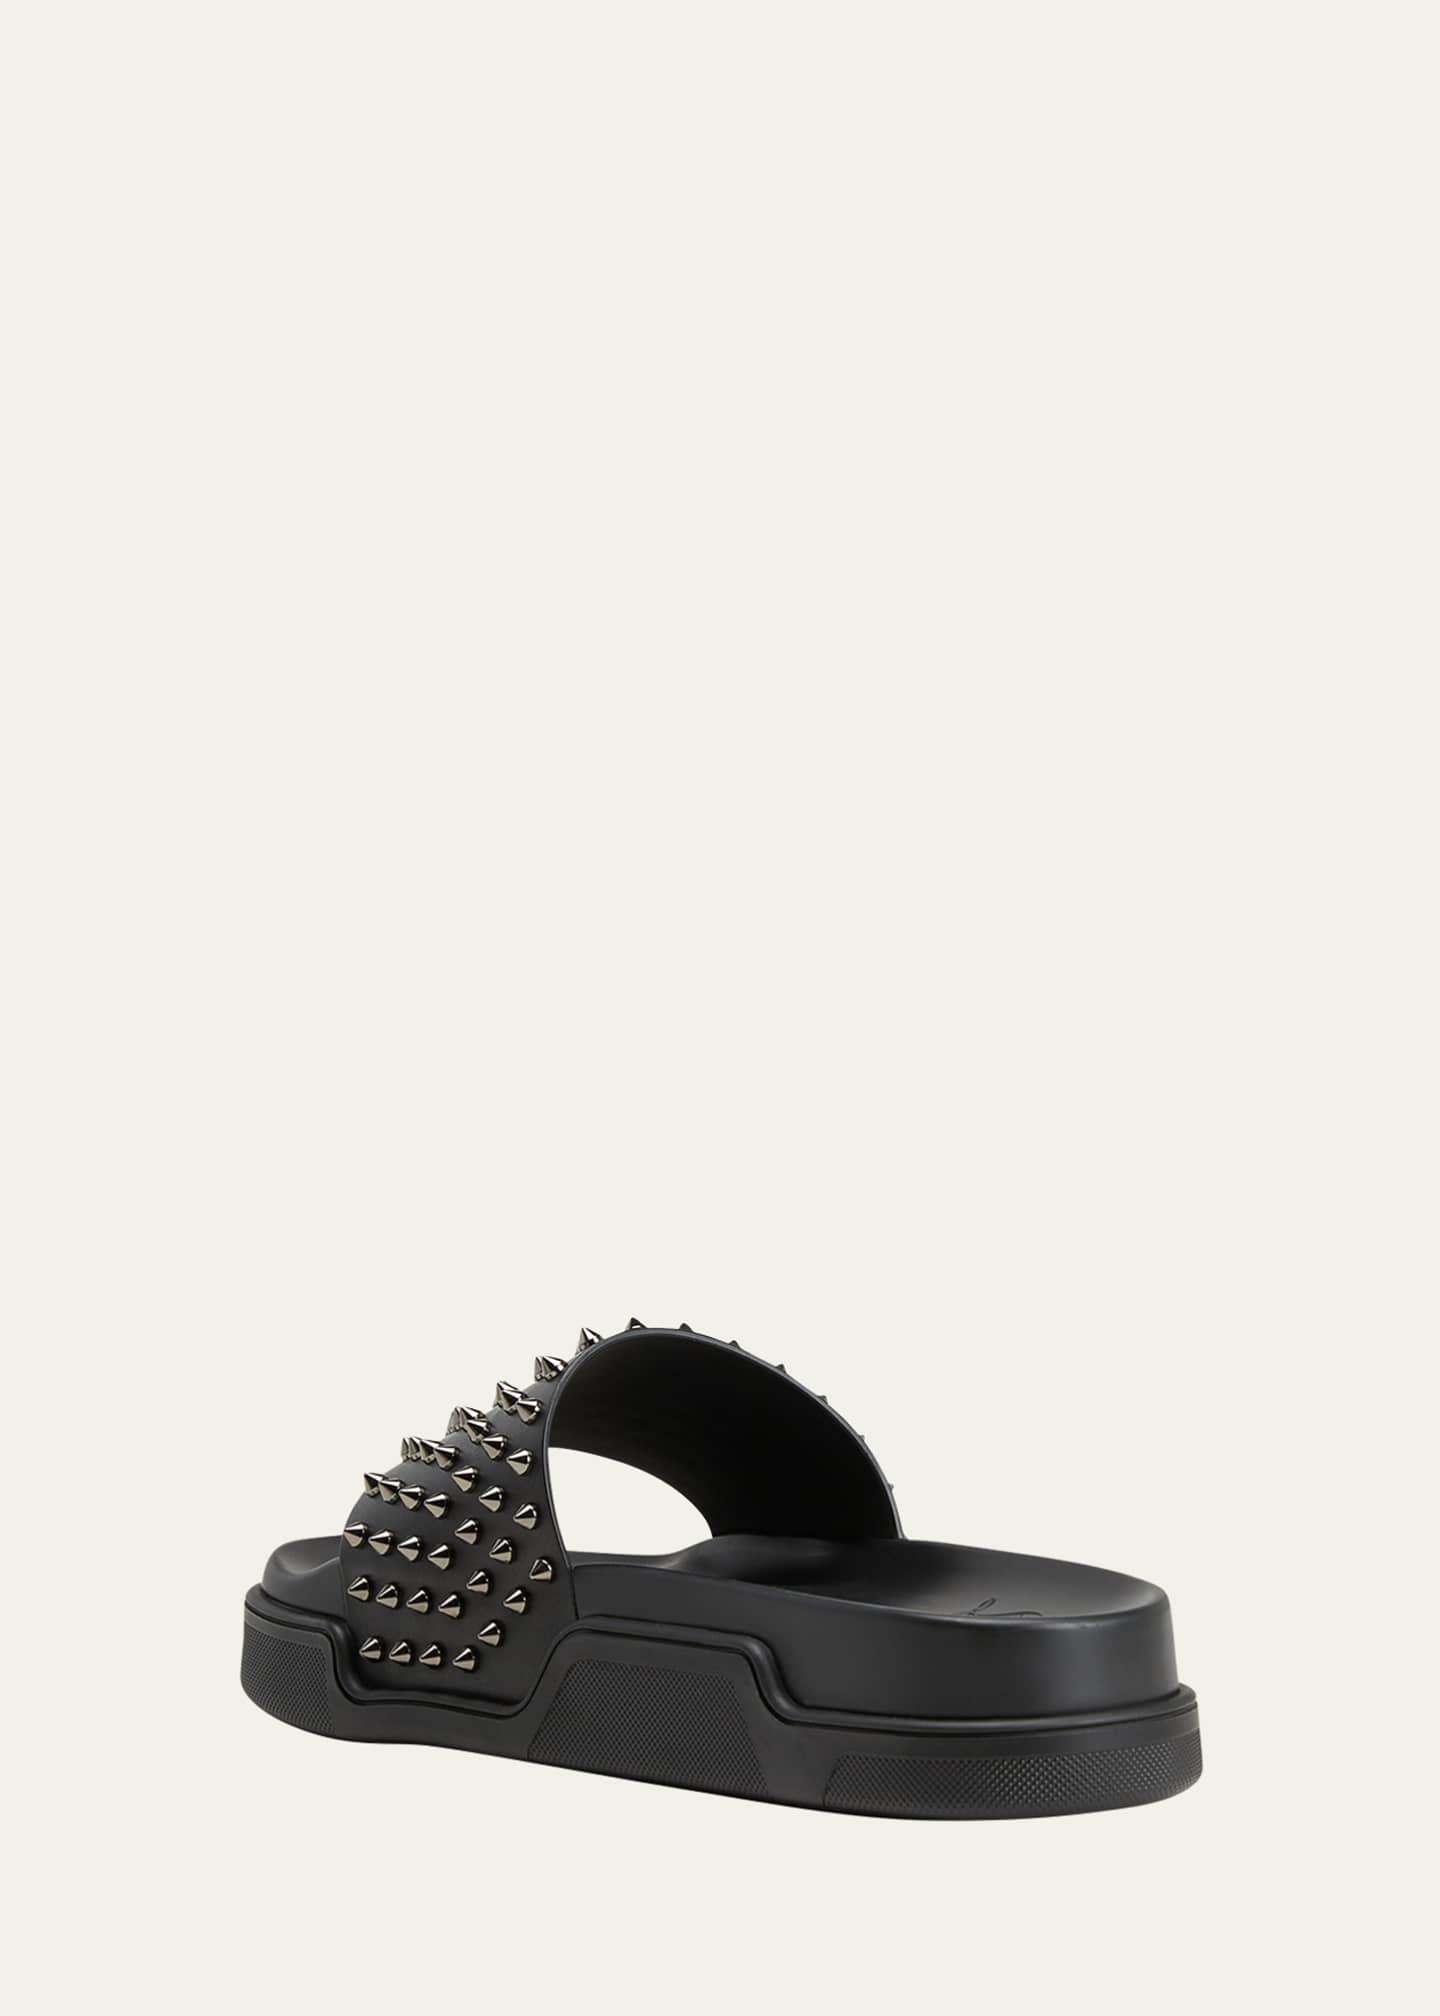 Christian Louboutin Men's Pool Fun Spiked Leather Slide Sandals ...